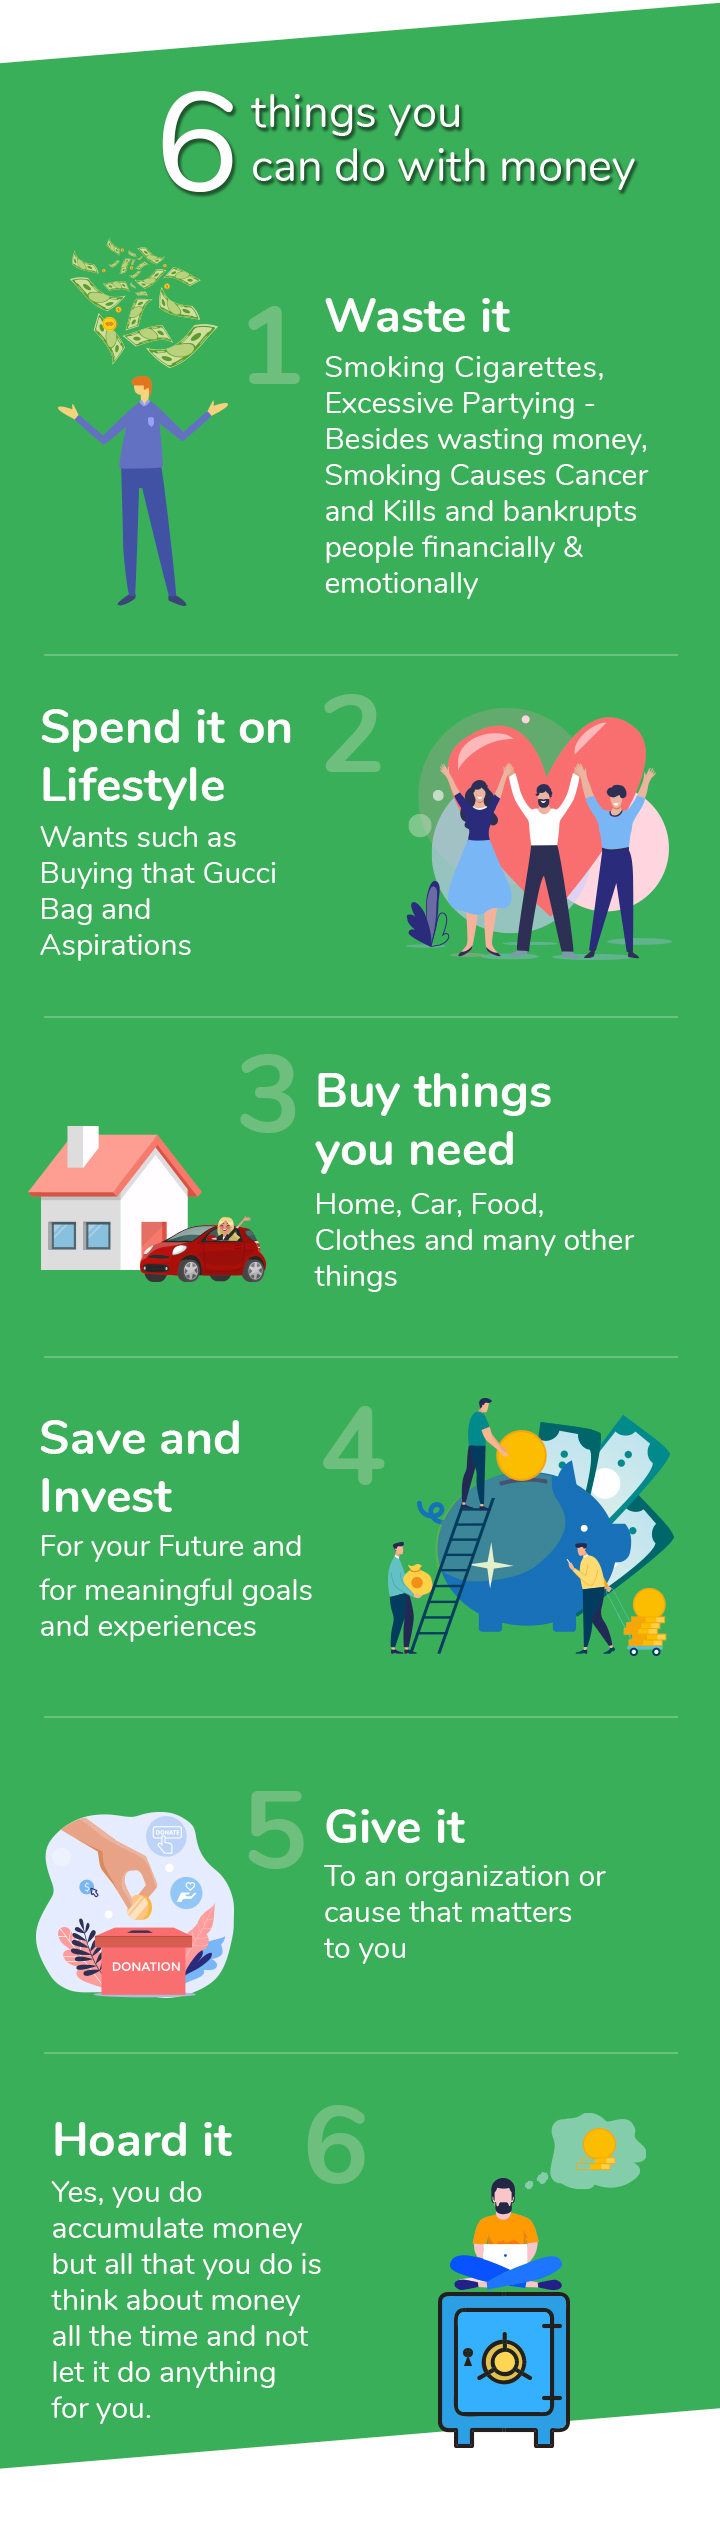 6 things you can do with money